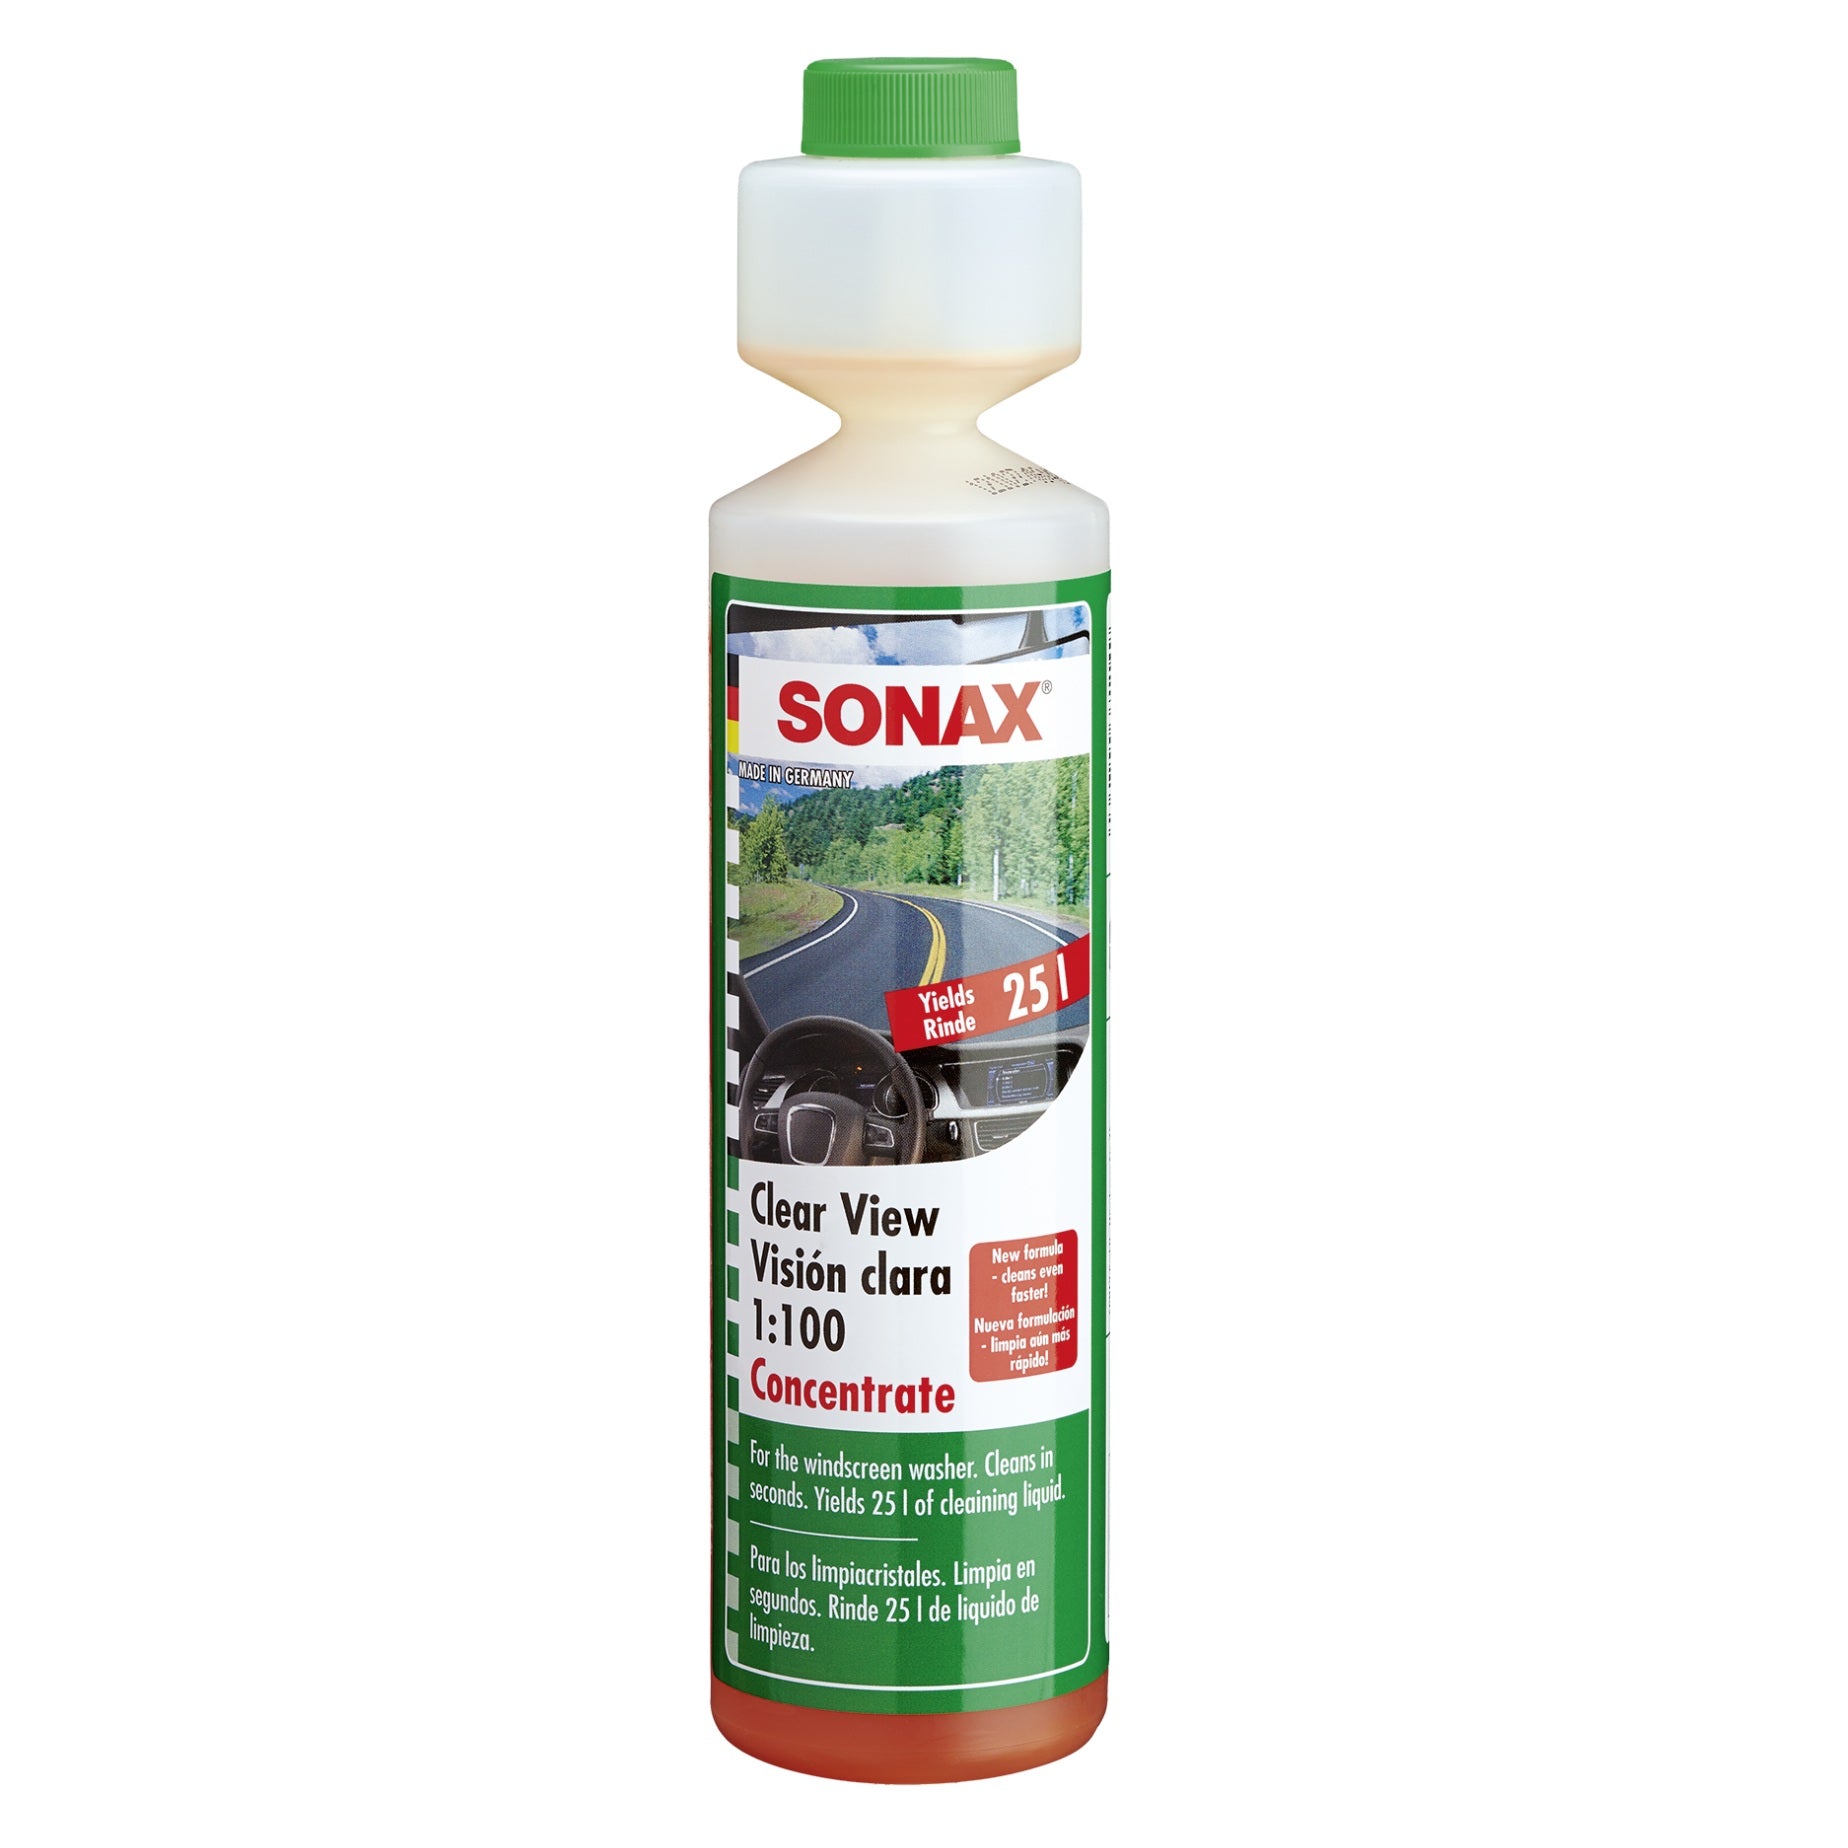 02605000 SONAX Screenwash Canister, Capacity: 5l, Sommer ▷ AUTODOC price  and review